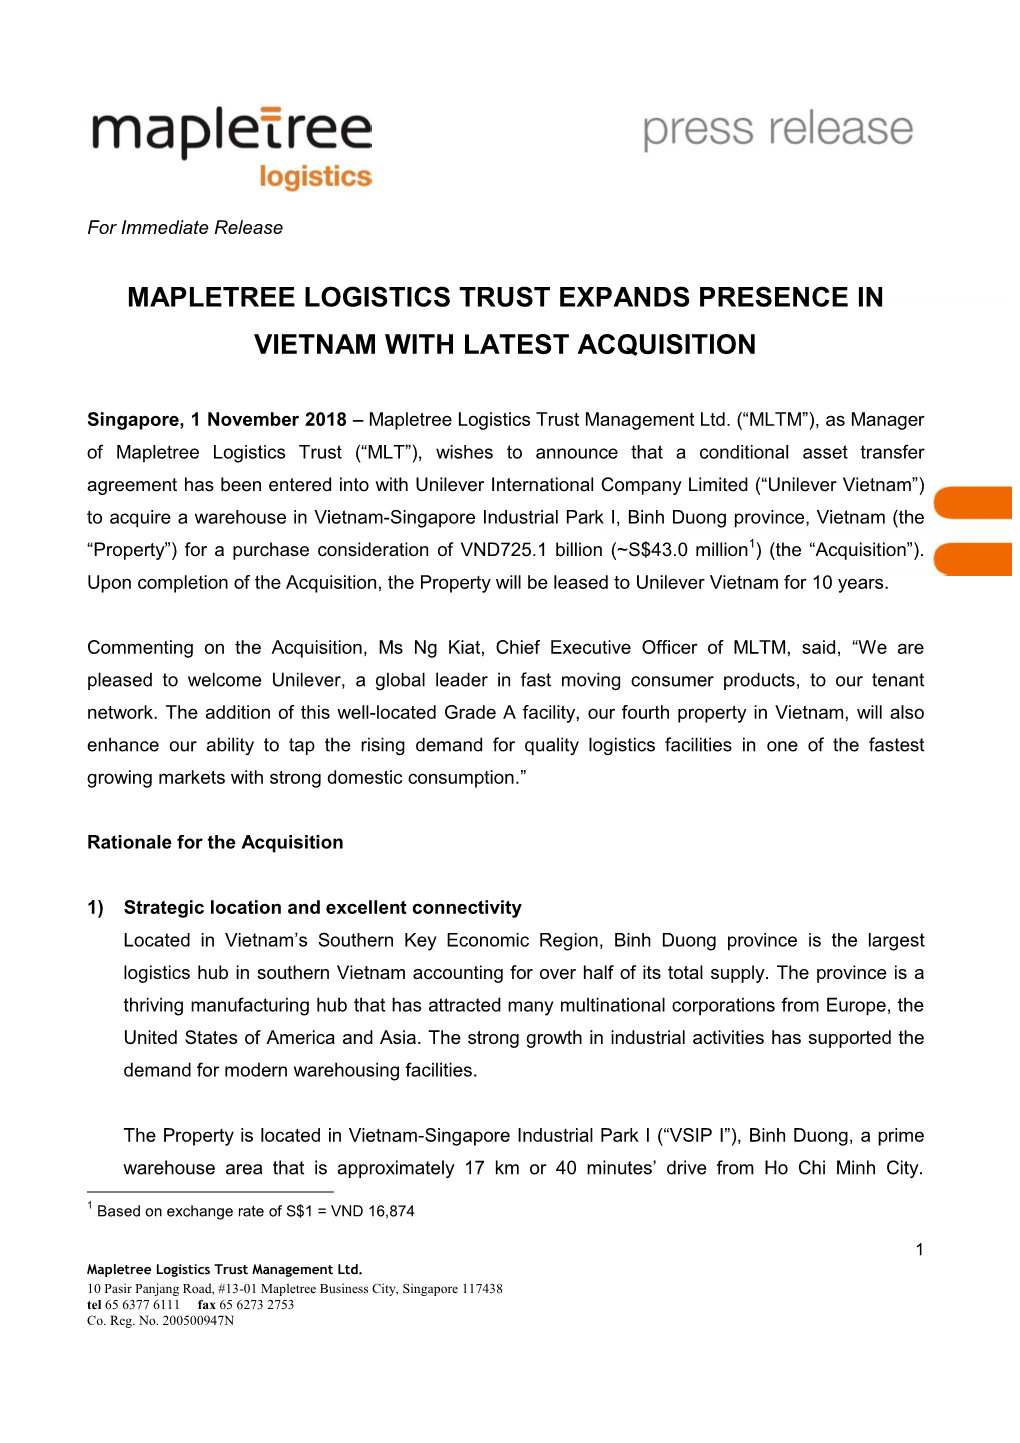 Mapletree Logistics Trust Expands Presence in Vietnam with Latest Acquisition